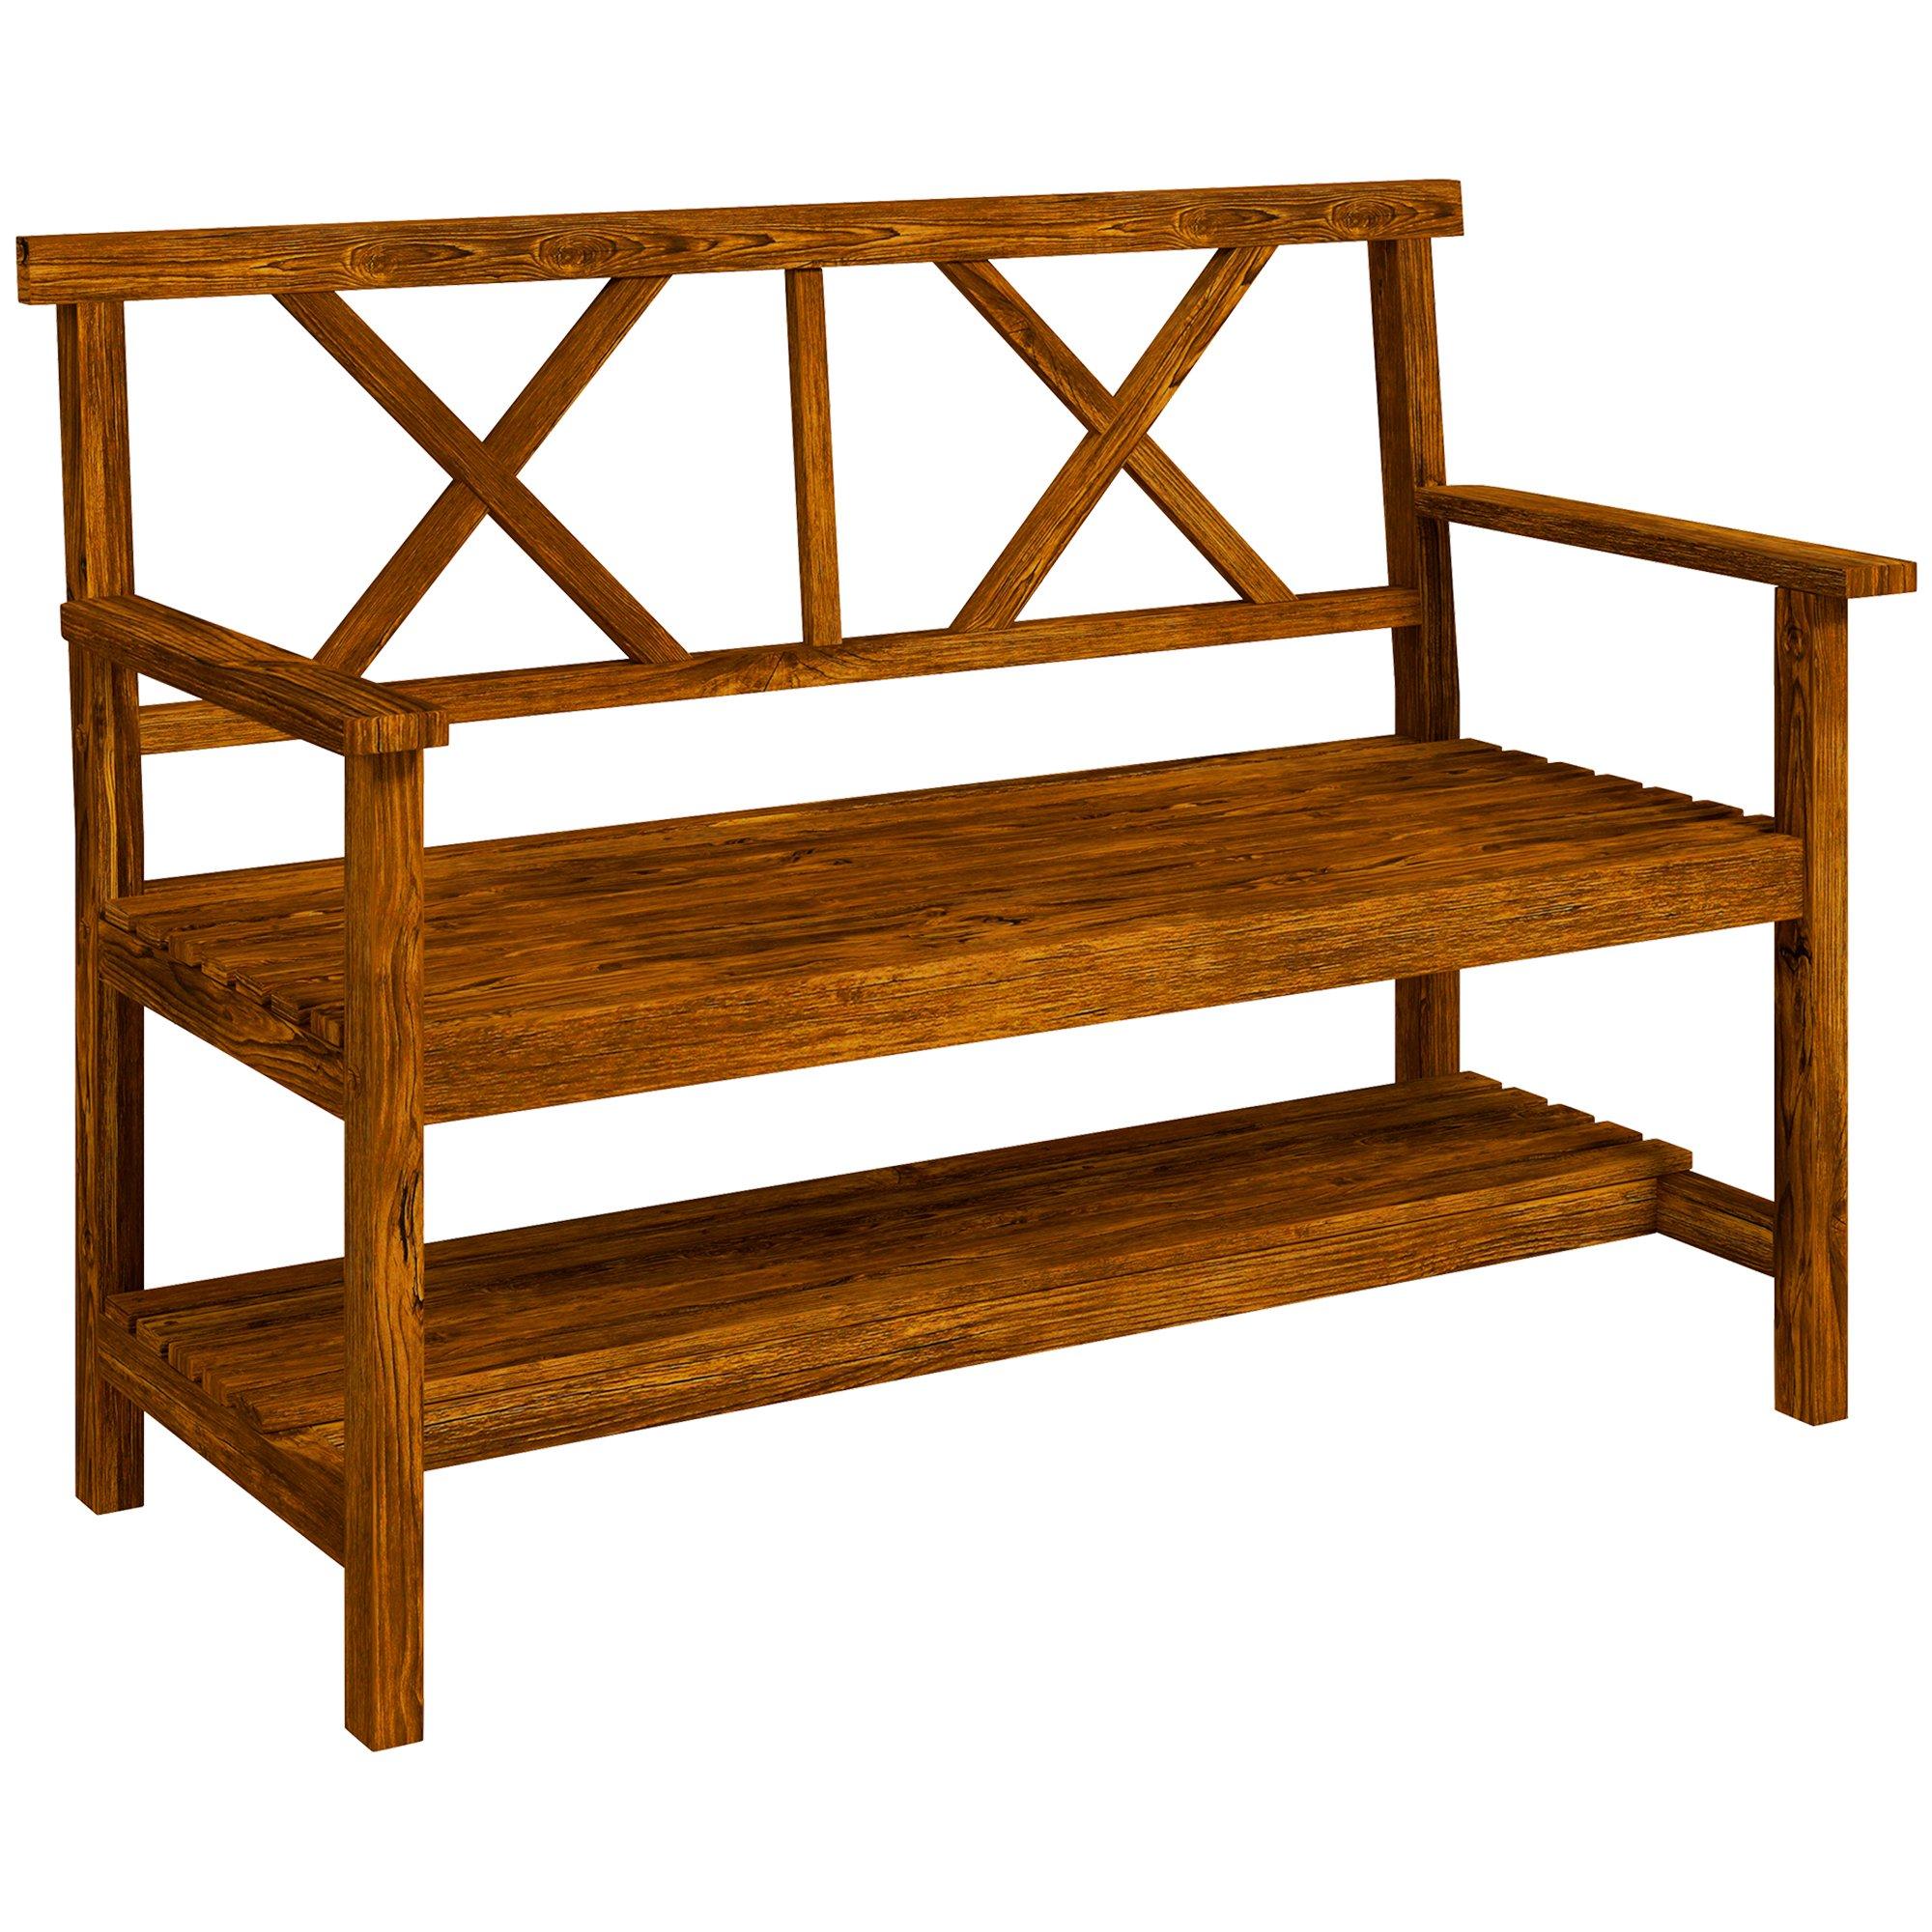 Wooden Garden Bench with Backrest, Armrests and Slat Seat for Patio Lawn Deck